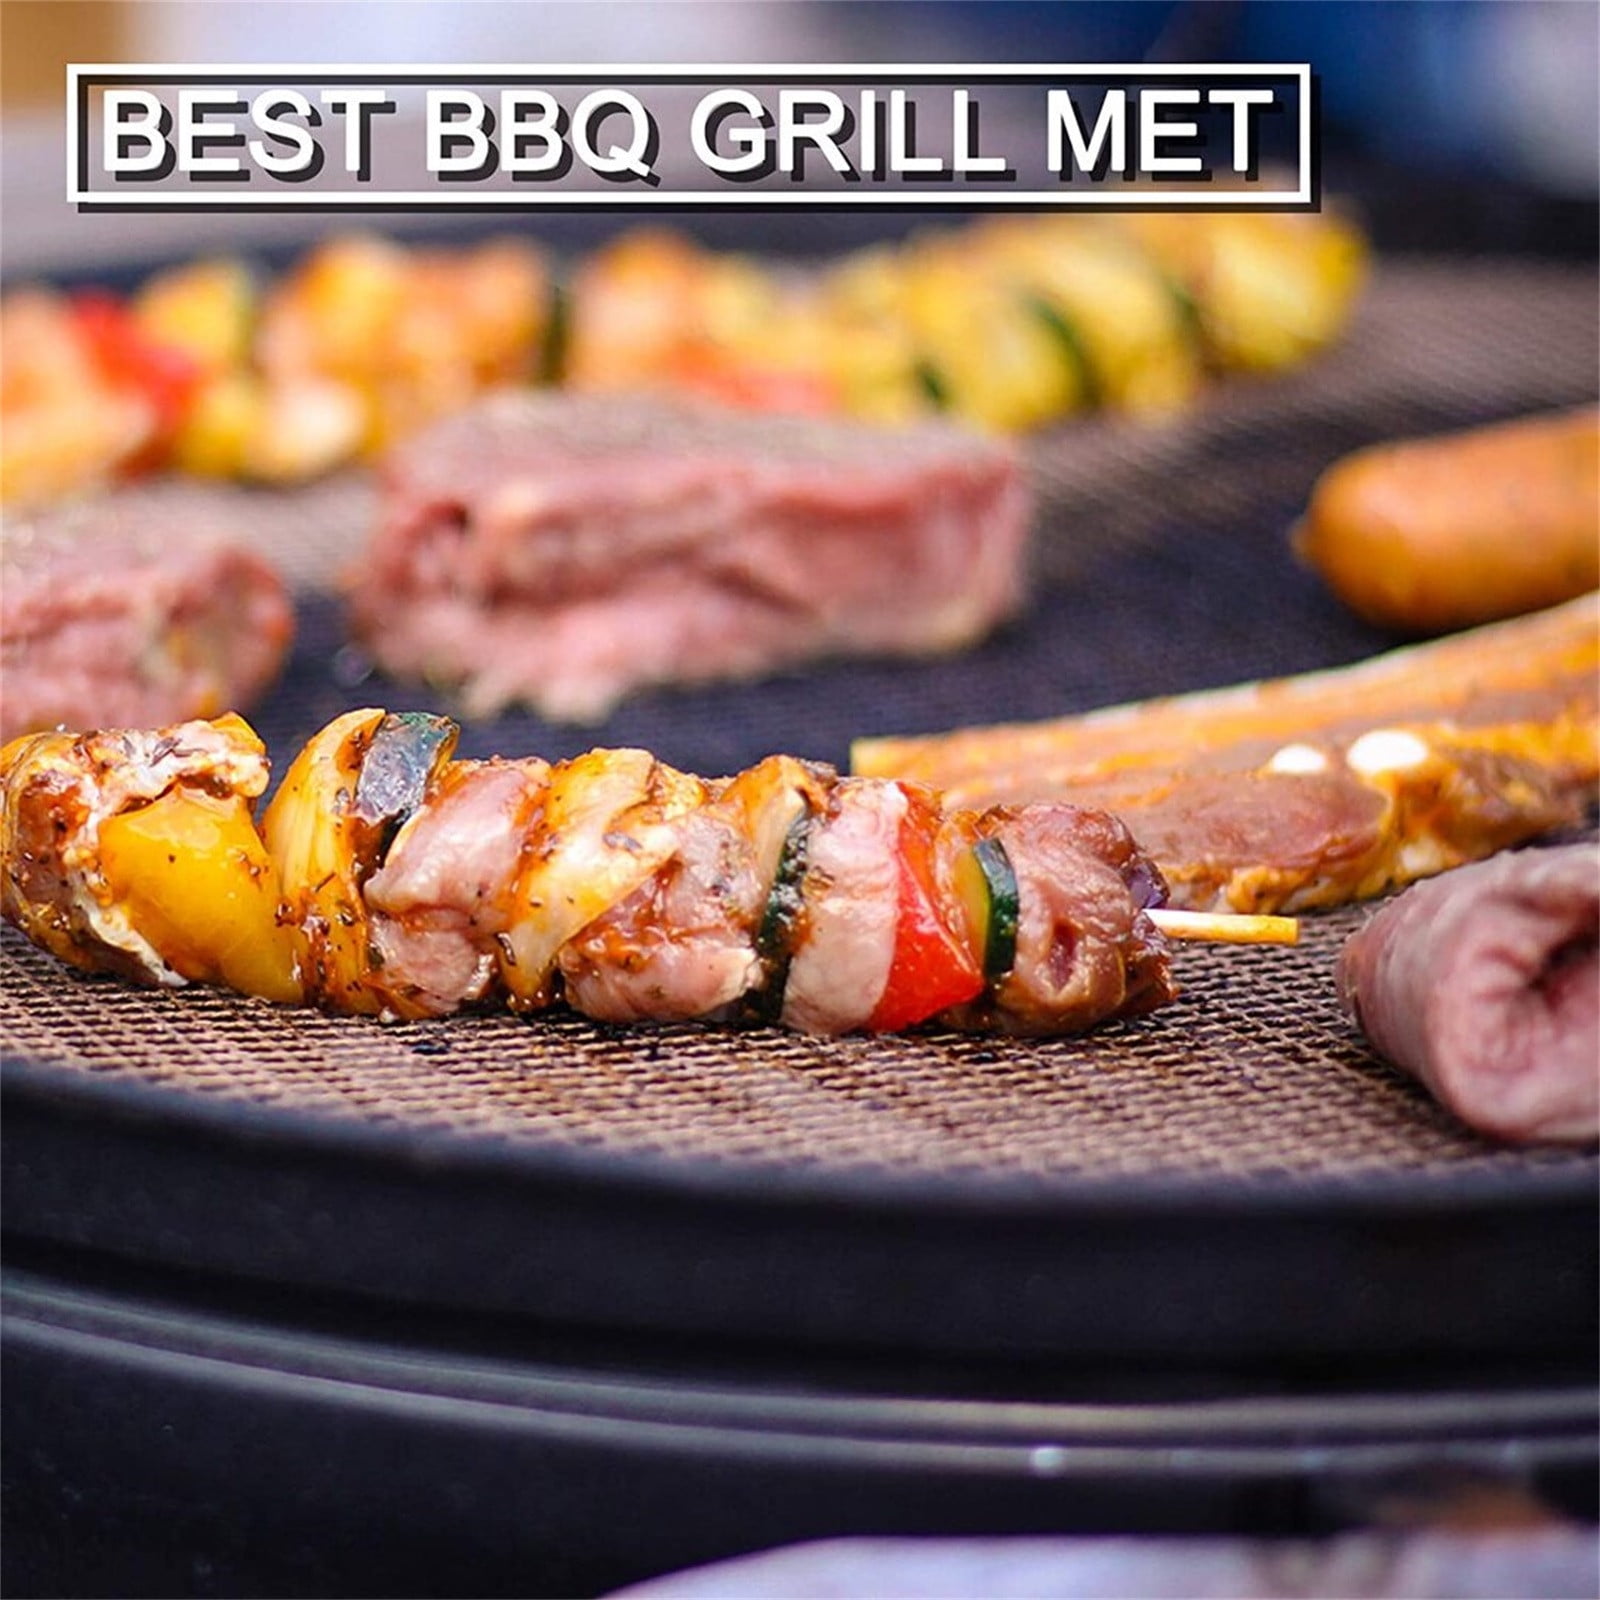 New Round BBQ Grill Mesh Home Roast Nets Bacon Grill Tool Iron Nets  Barbecue Accessories Non-stick Churrasco Utensilios 석쇠 그릴망